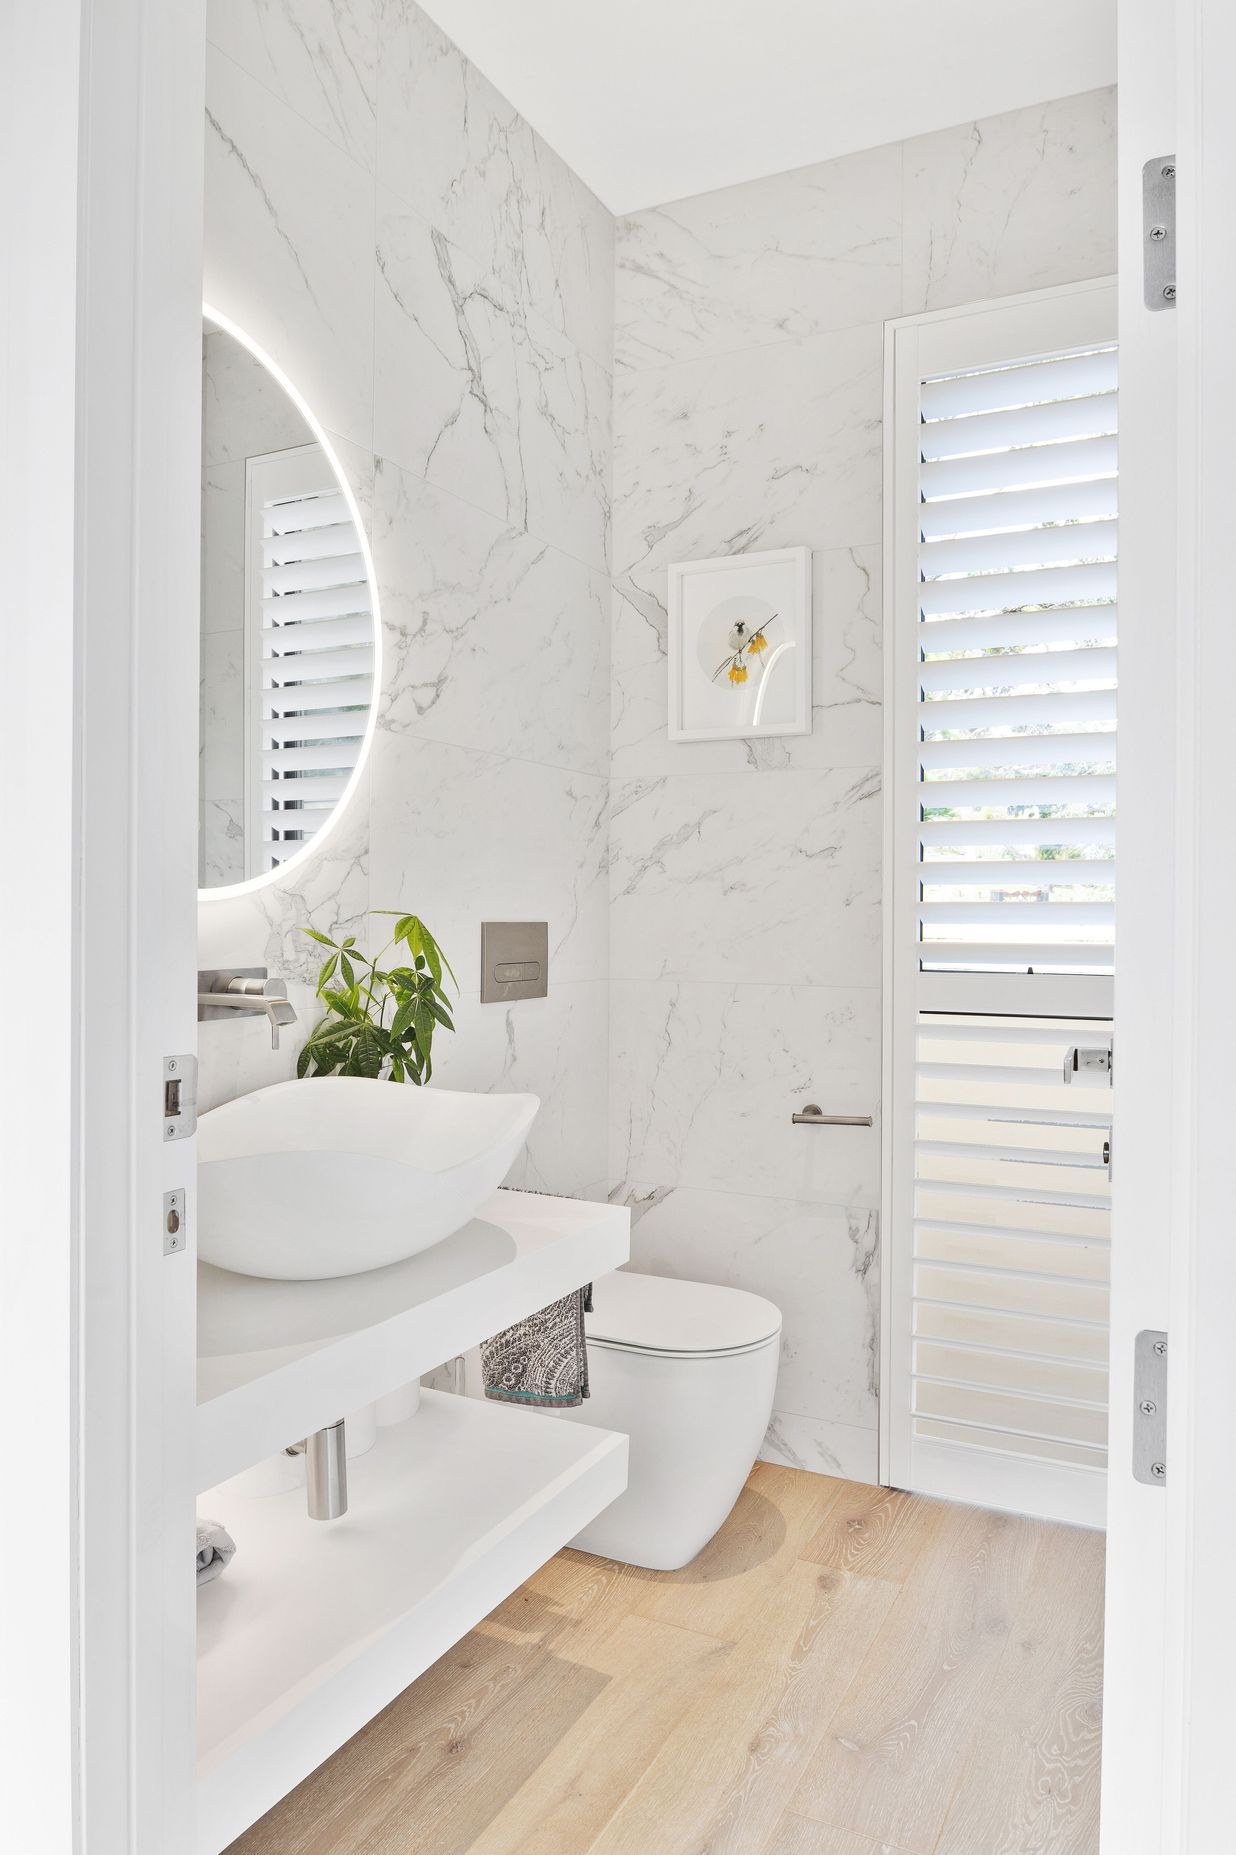 White finishes were installed in the bathroom for a clean, bright feel.